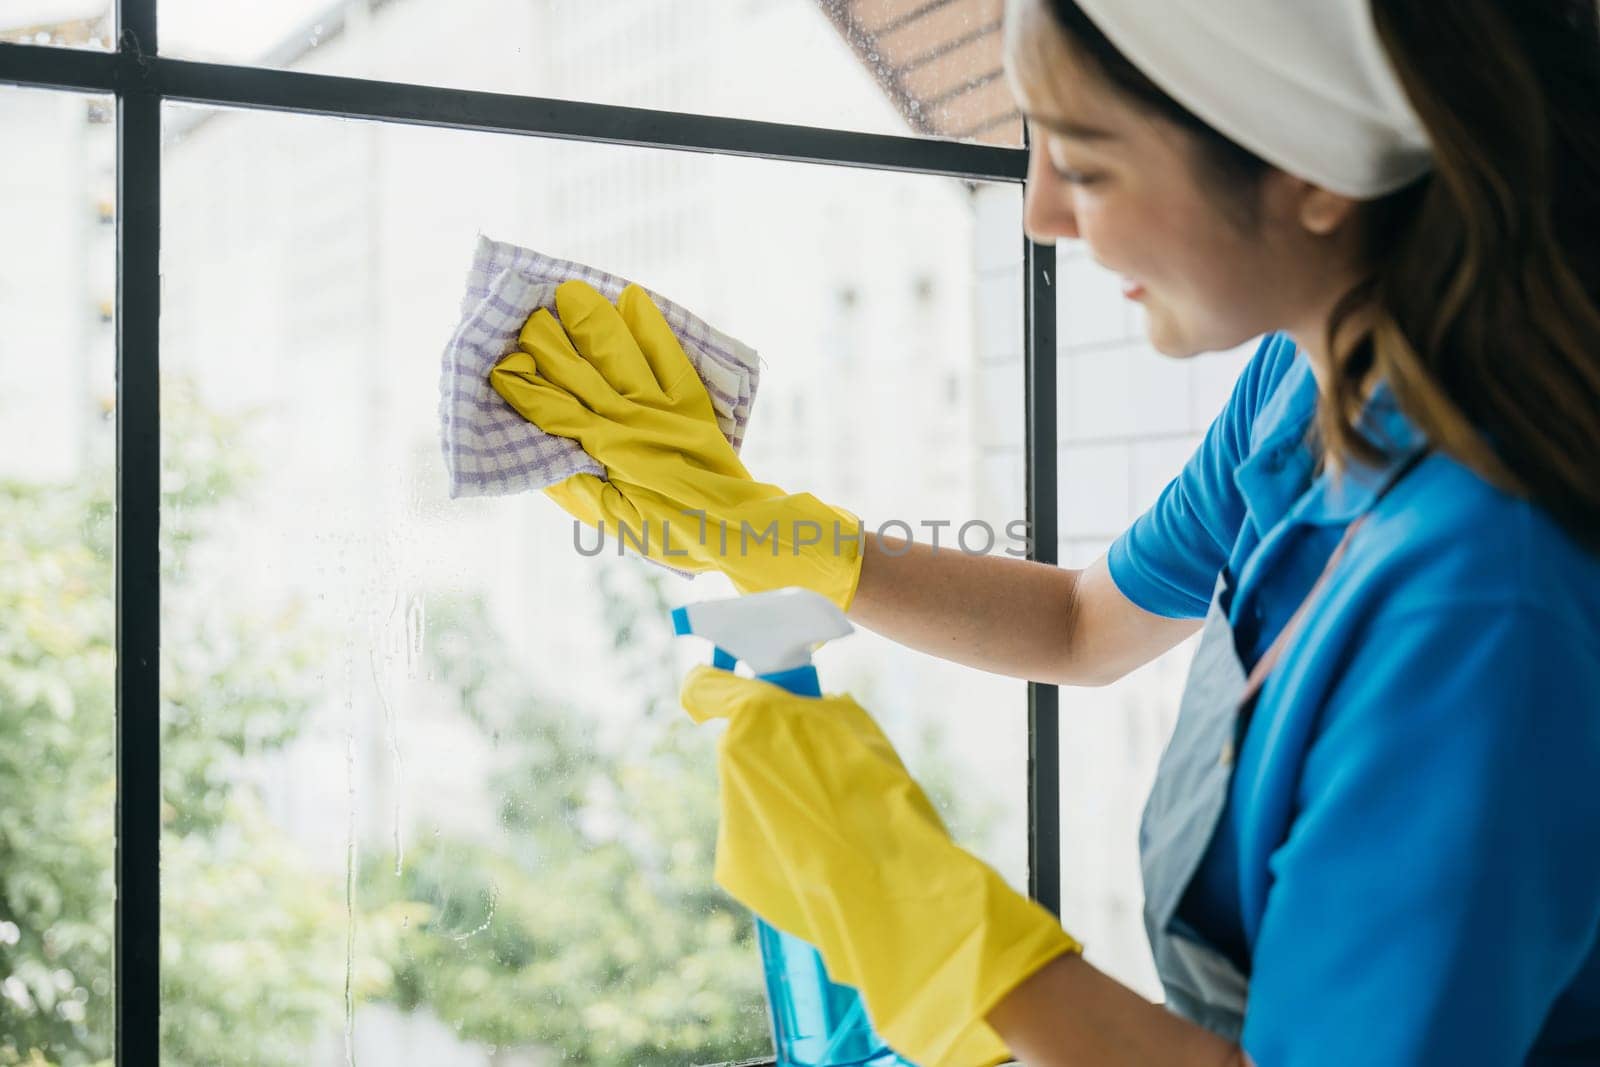 In an office setting a happy maid uses a spray to clean windows. Her housework routine ensures transparency using gloves and cleaning products for sparkling clean windows.